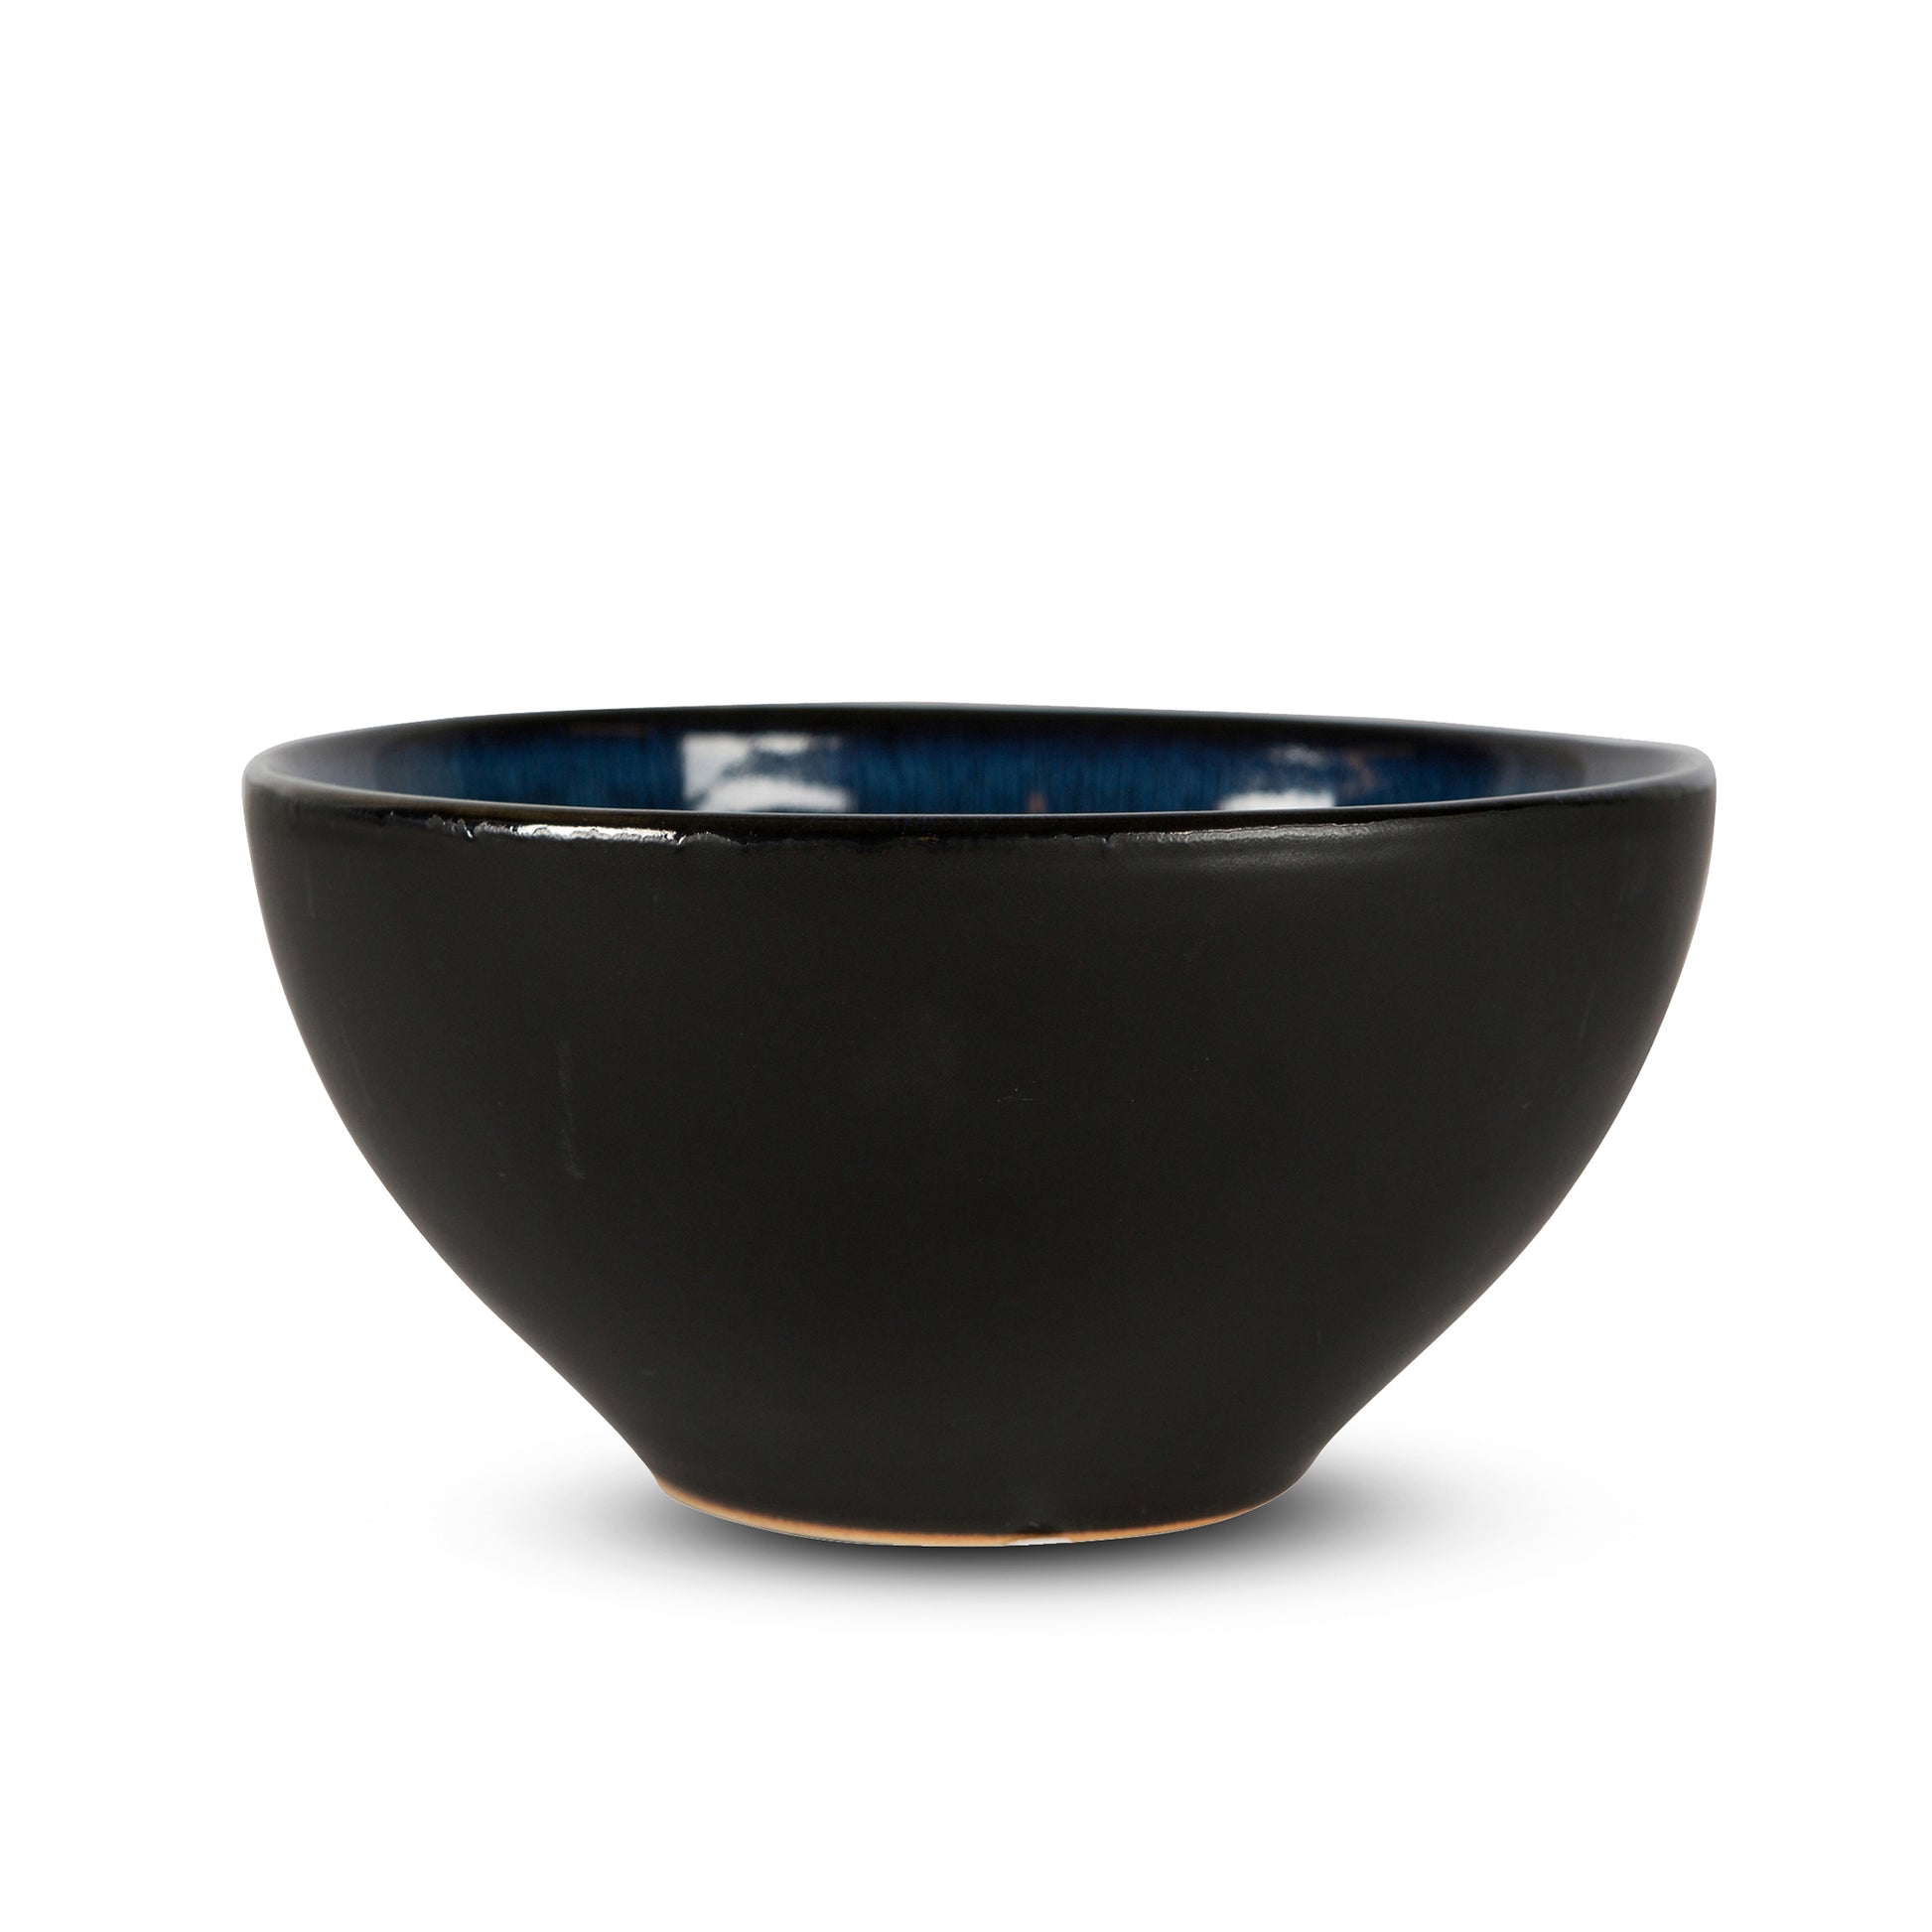 ByOn Guilia Bowl, Small  Widgeteer Inc.   5251903113 0000 5251903113 front